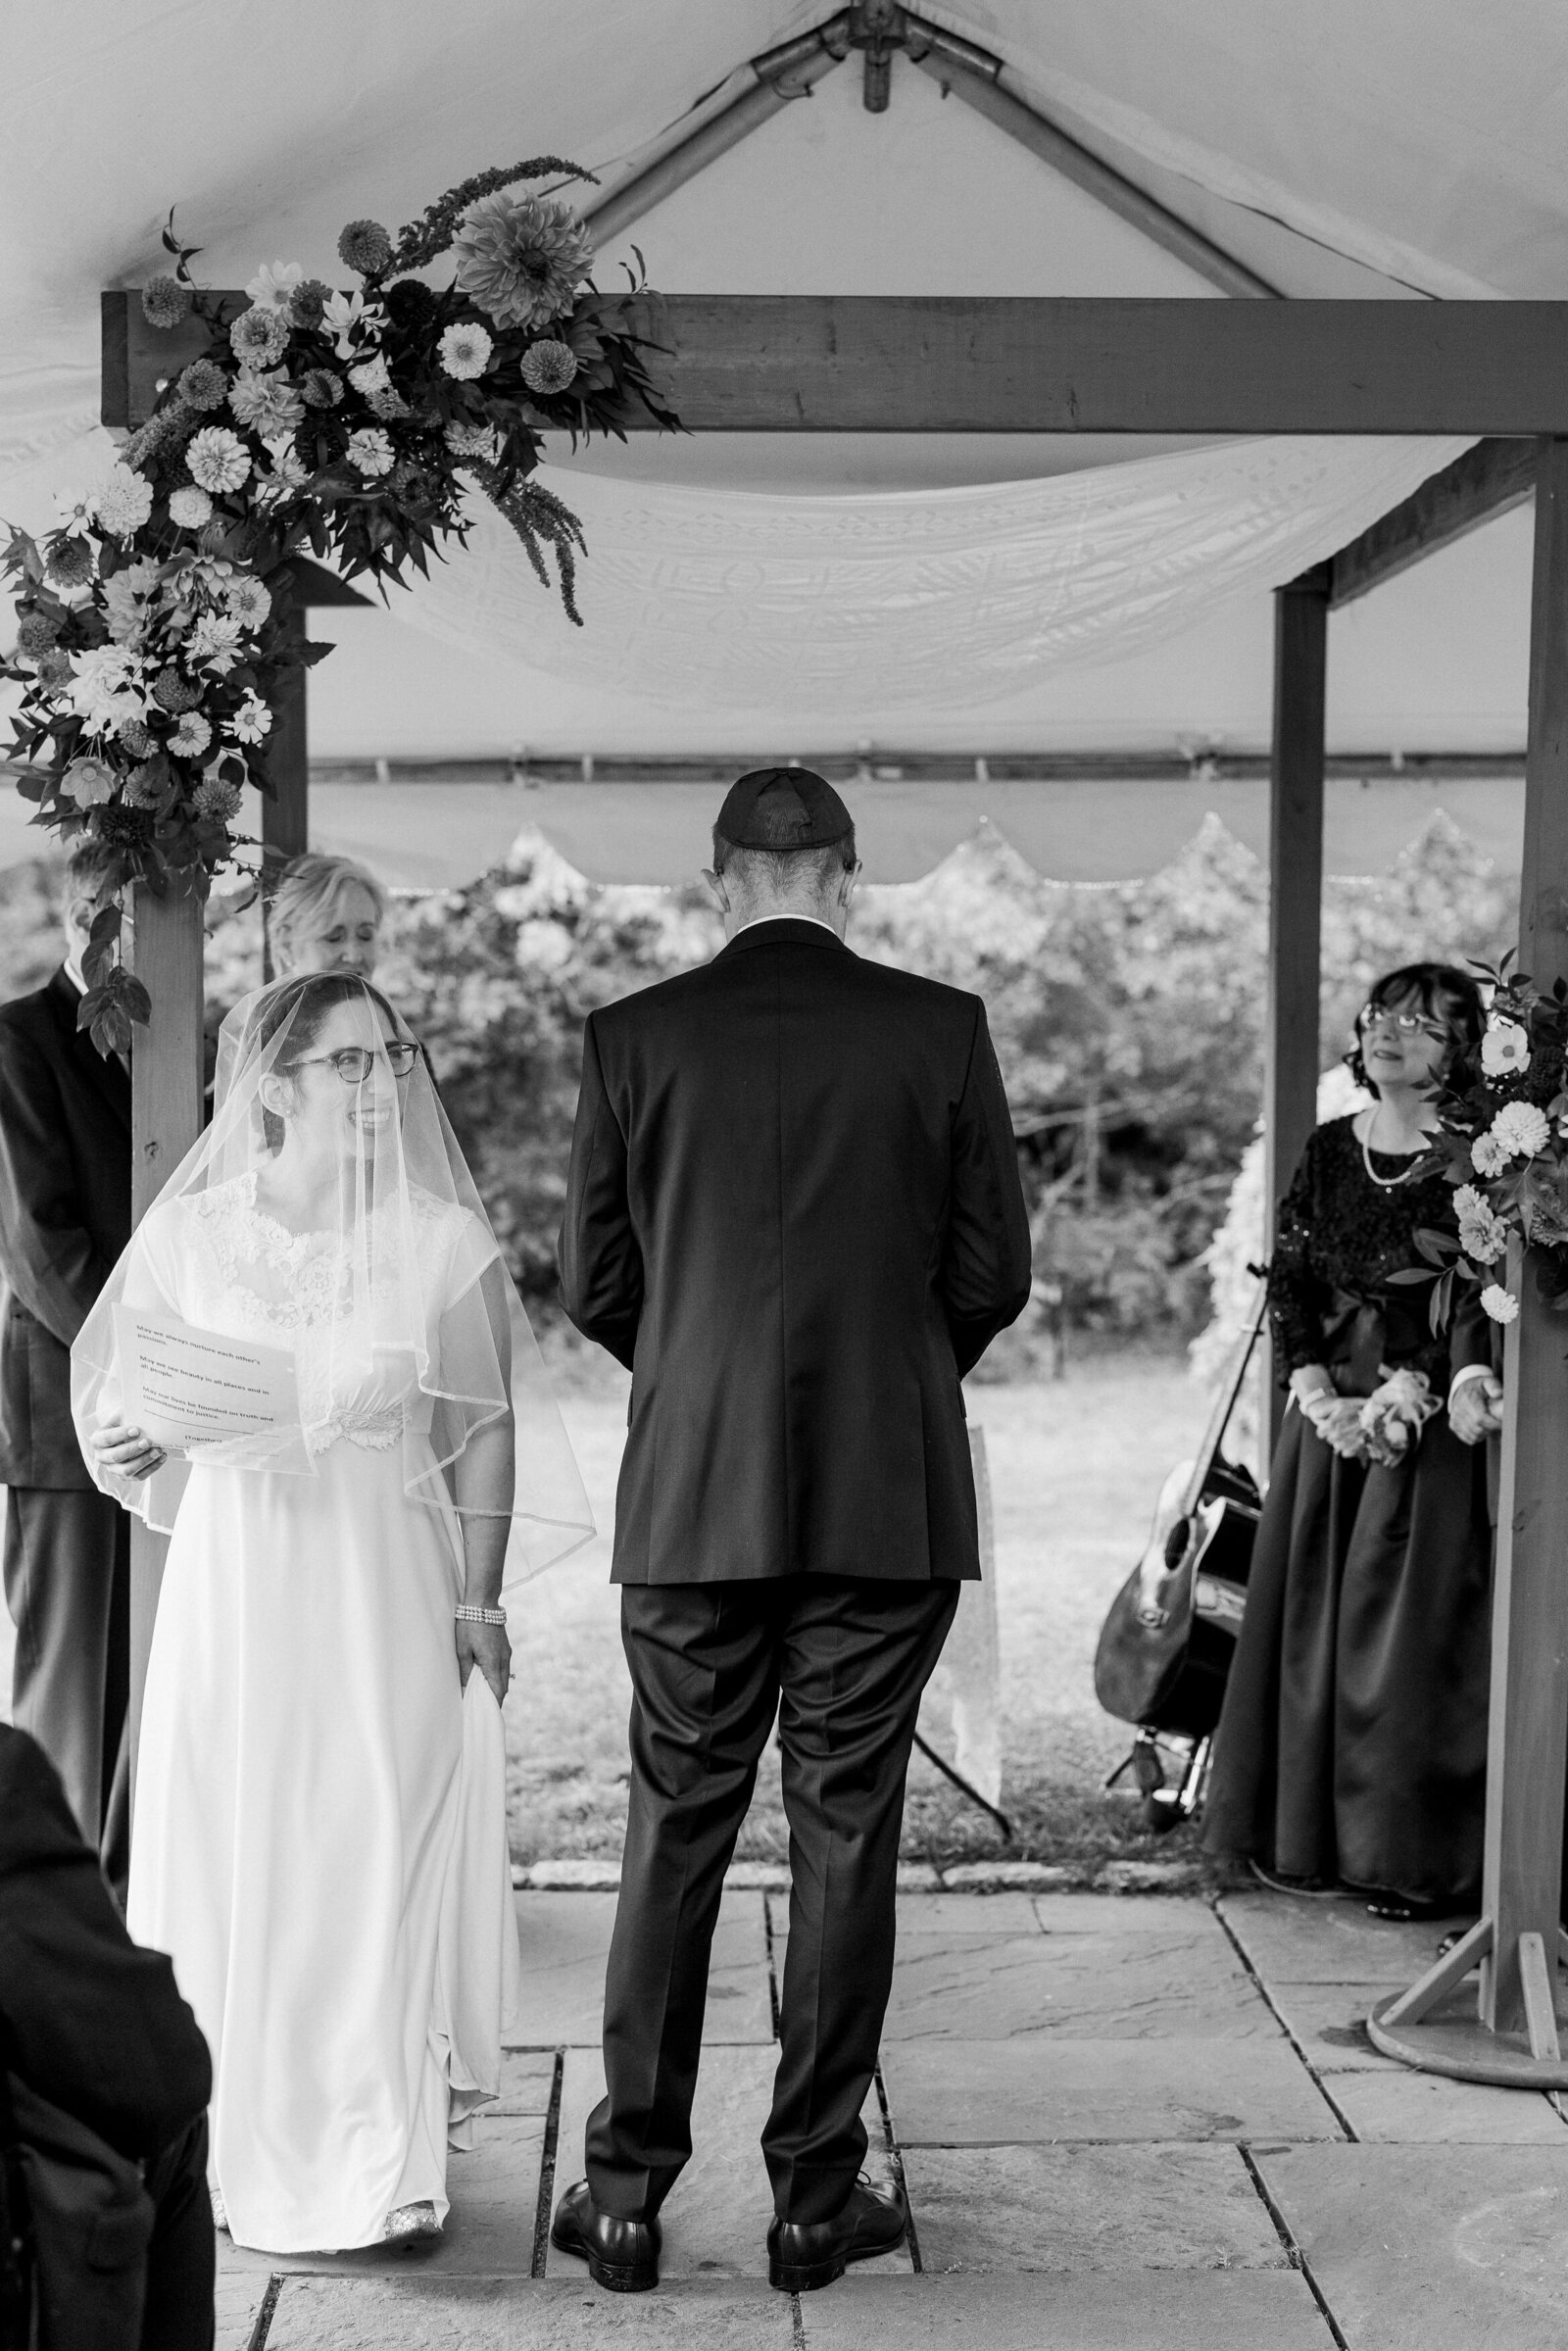 Black and white photo of a couple standing together at their wedding ceremony.